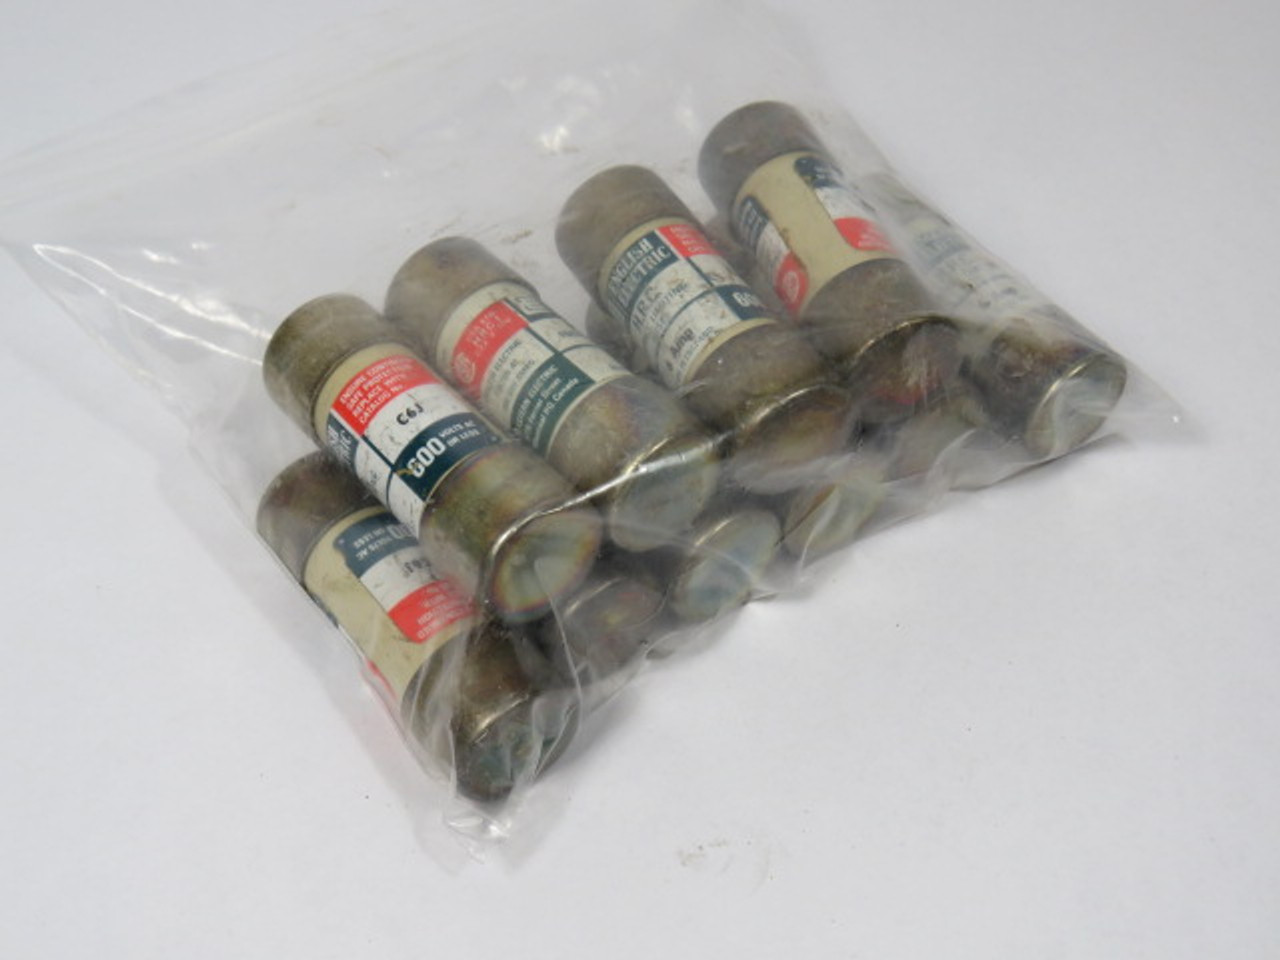 English Electric C6J Energy Limiting Fuse 6A 600V Lot of 10 USED